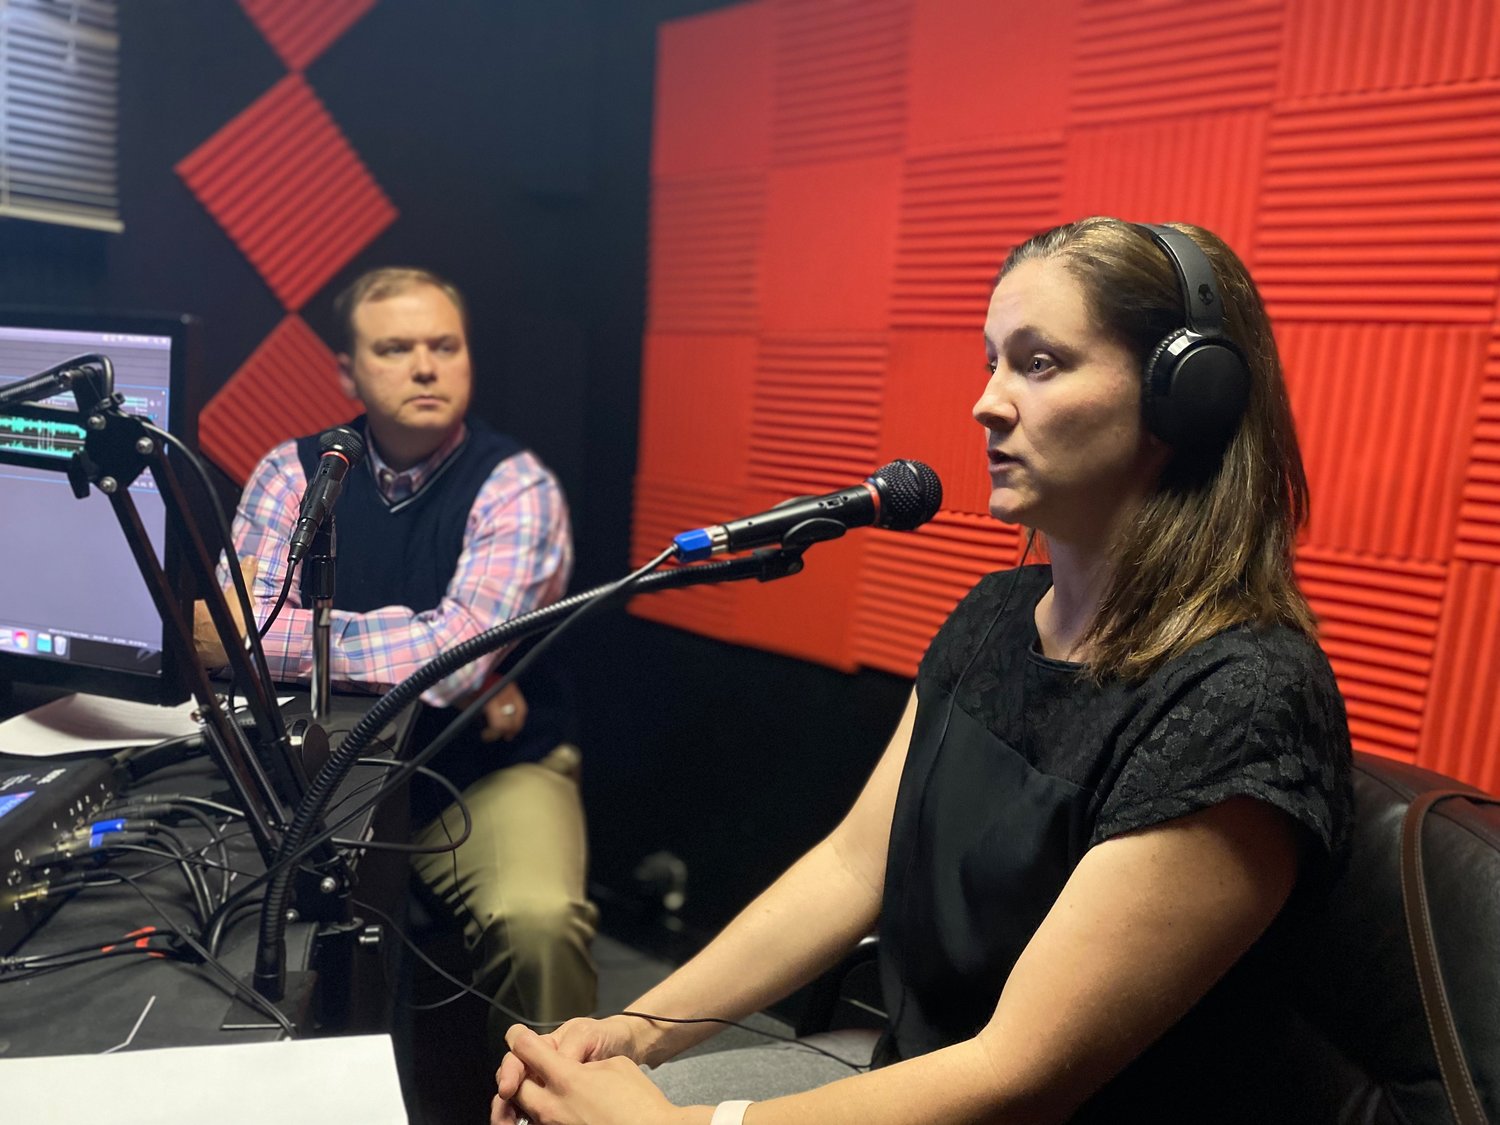 The United Way's Katie Childs, shown during a News + Record 'Chatcast' podcast recording. The Chatcast is co-hosted by Daniel Simmons of the Boys & Girls Clubs (shown, left) and CN+R Publisher Bill Horner III.